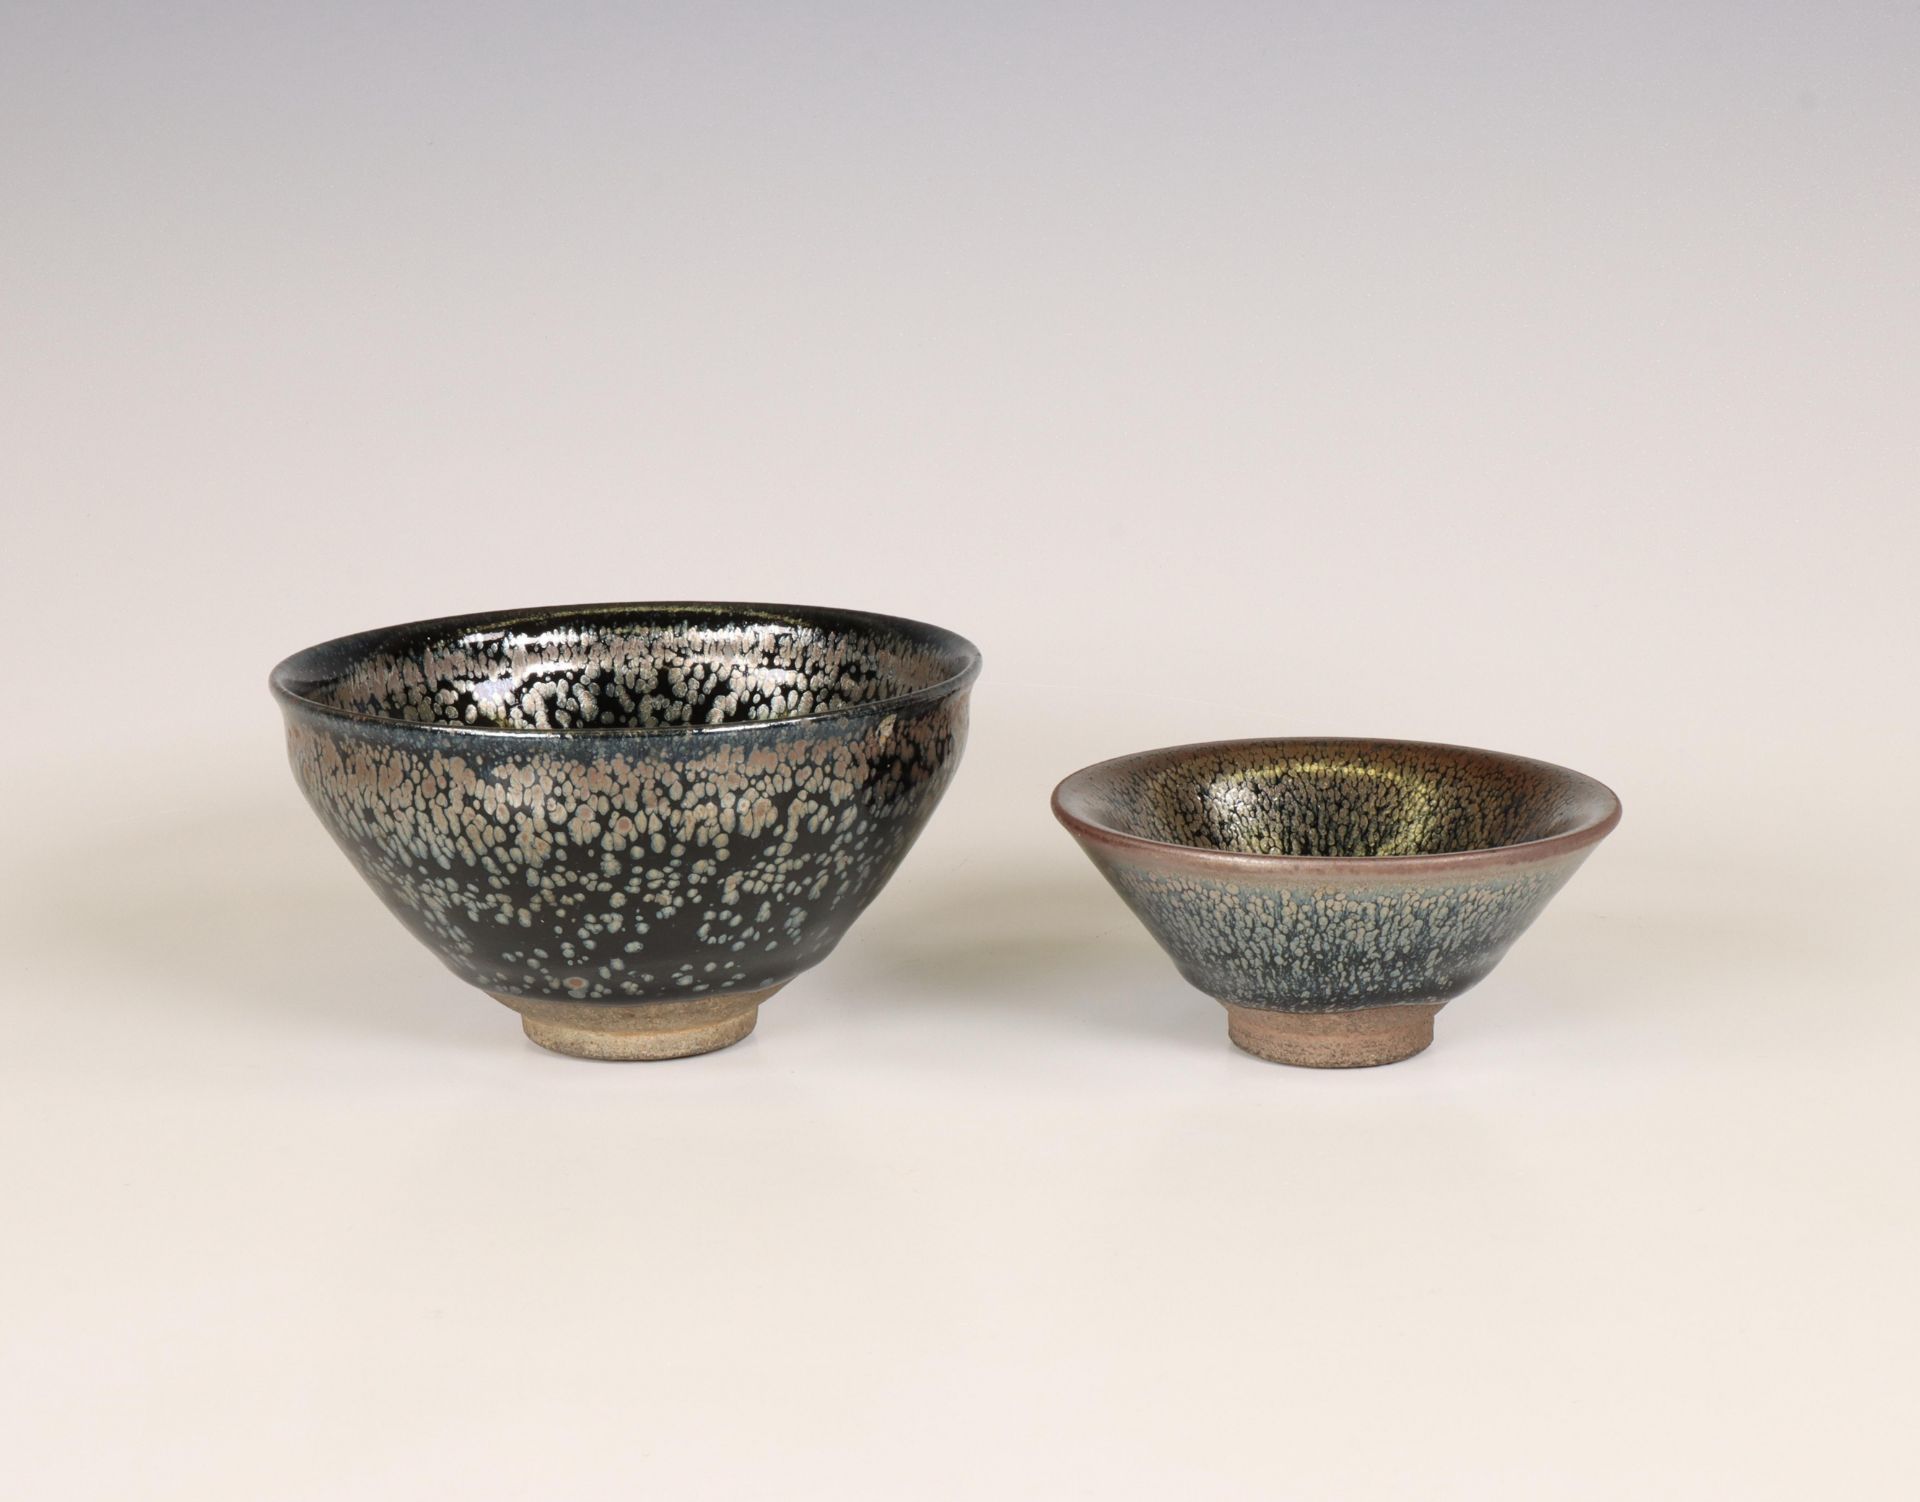 China, two silver-spot earthenware bowls, possibly Song dynasty (960-1279), - Image 3 of 6